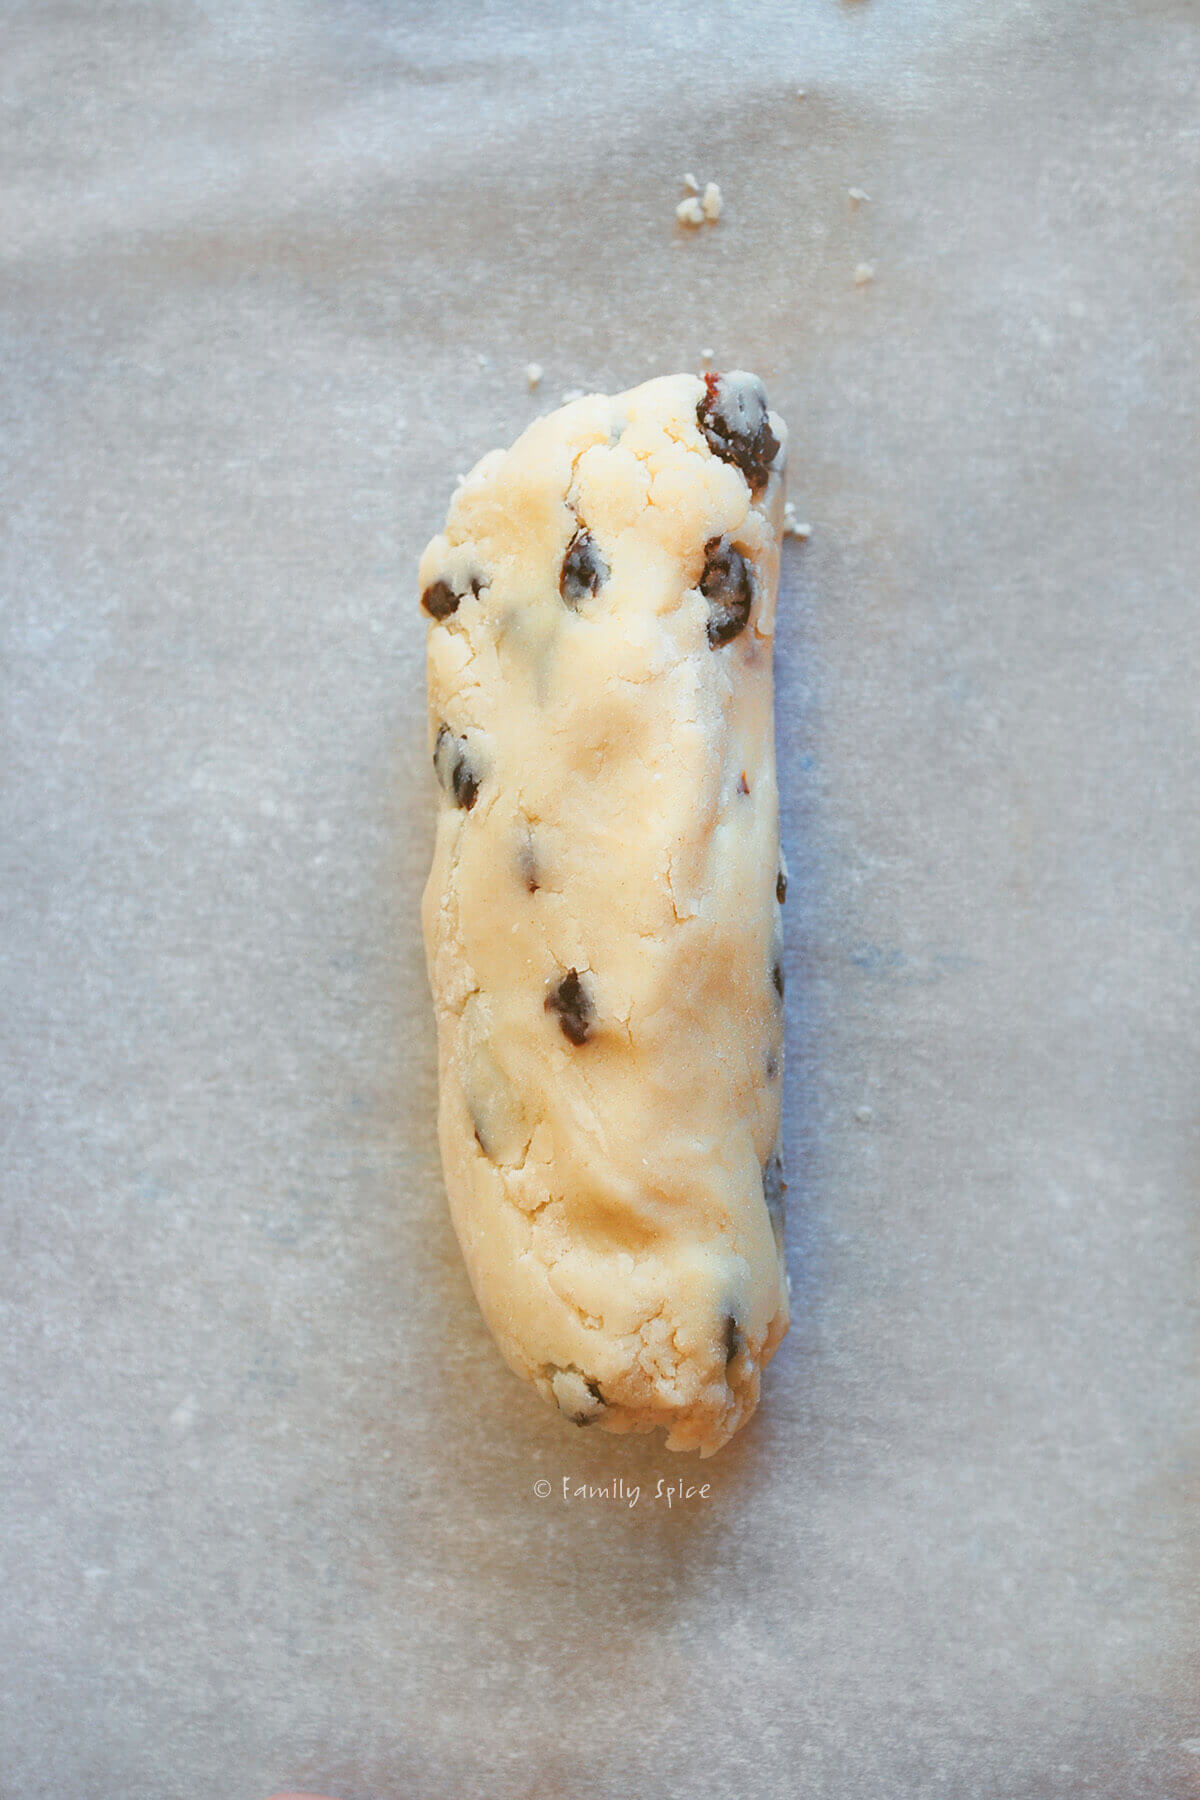 Cherry orange cookie dough rolled into a log and refrigerated